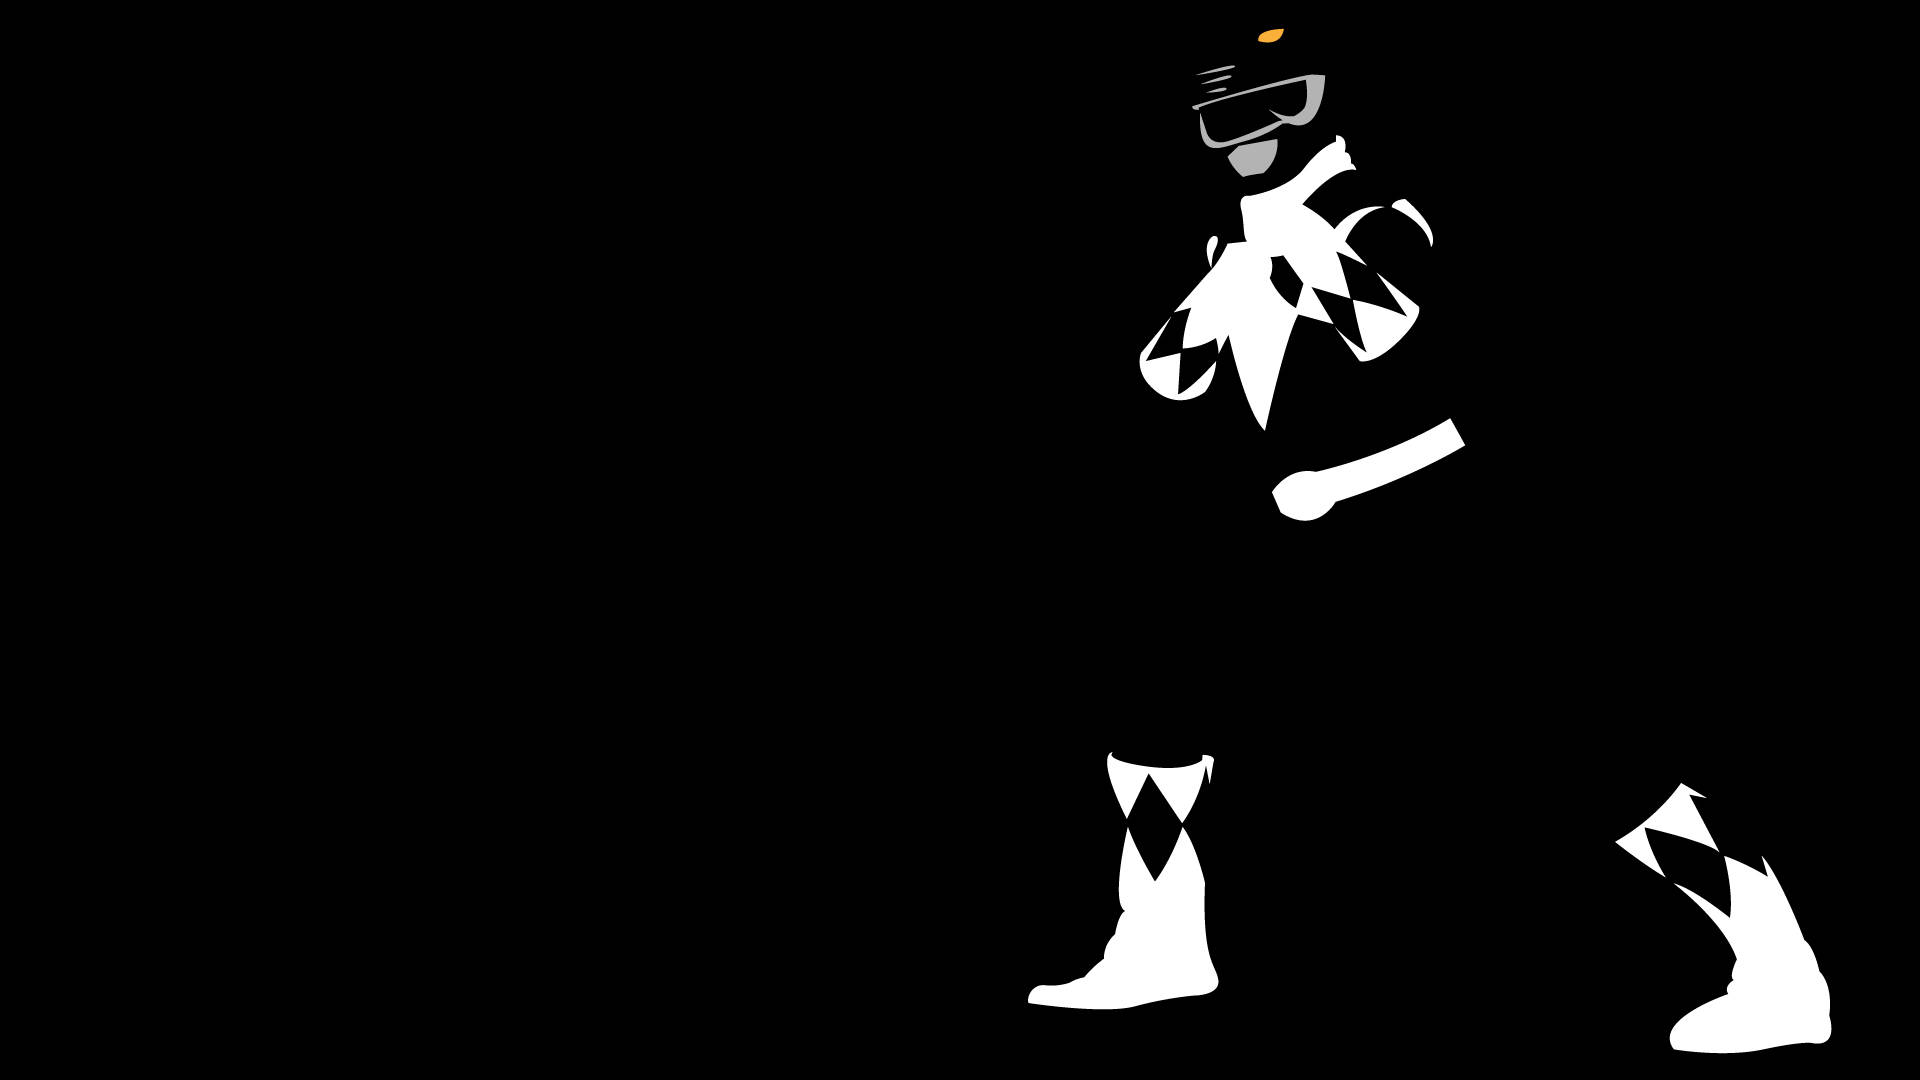 1920X1080 Power Rangers Wallpaper and Background